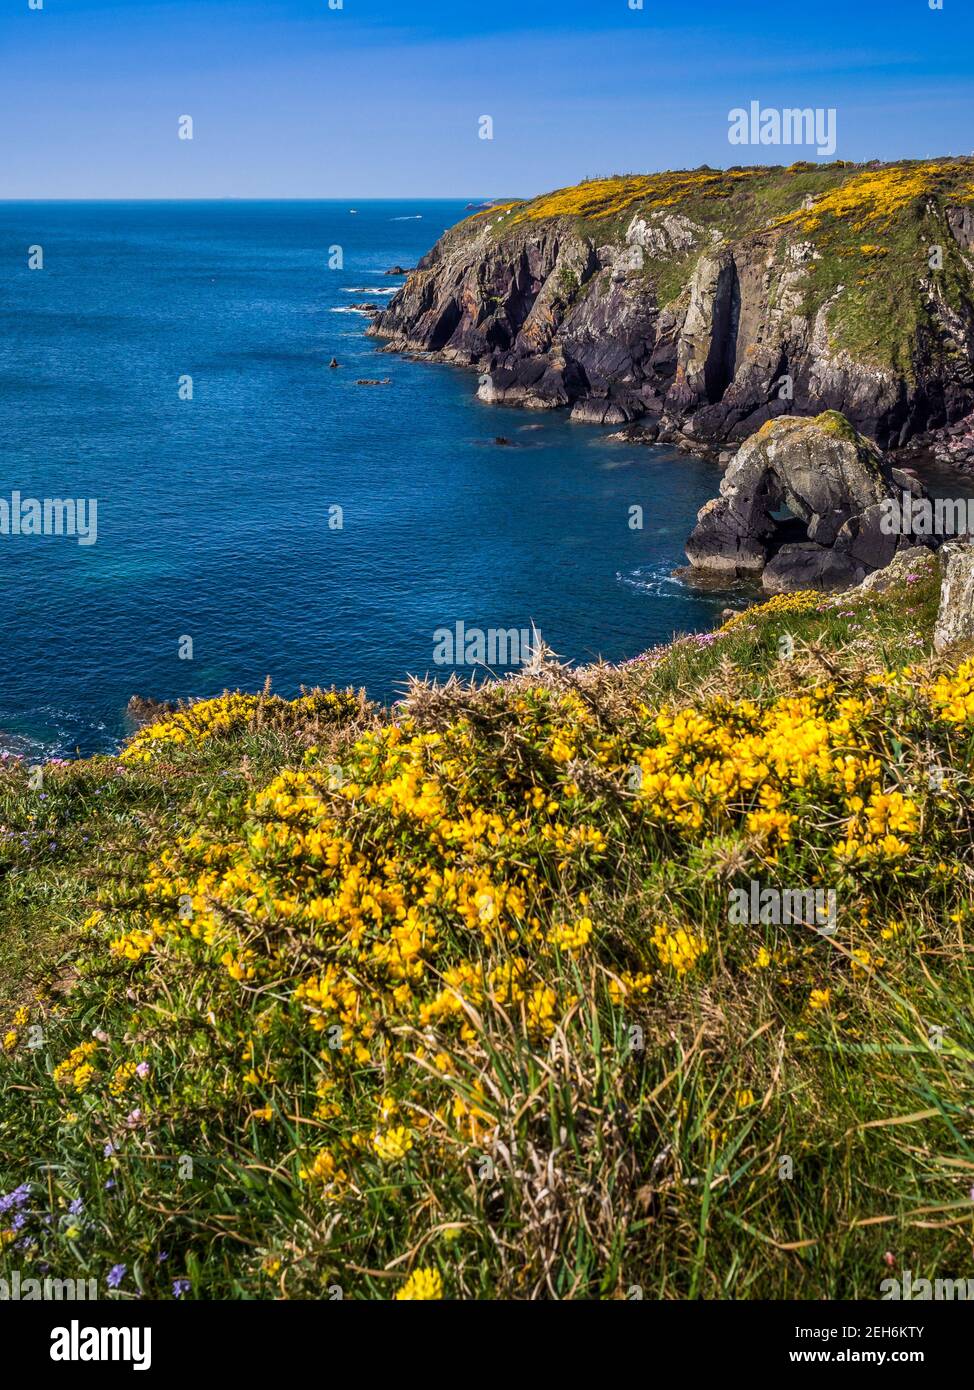 St Non's Bay in Pembrokeshire reputed to be the birthplace of St David the patron saint of Wales. Stock Photo